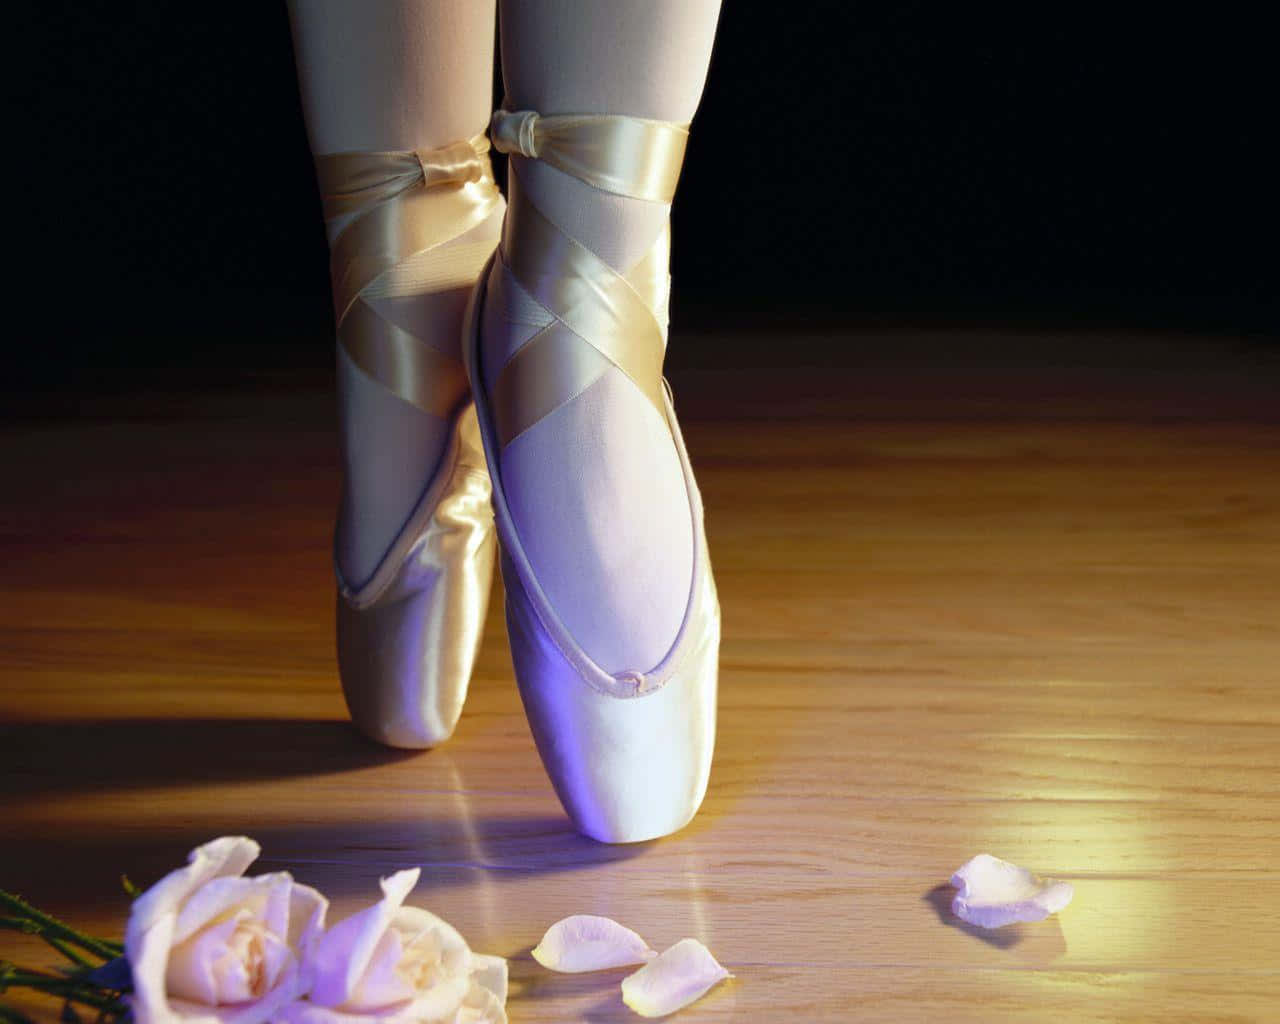 Ballet Shoes With Roses On The Floor